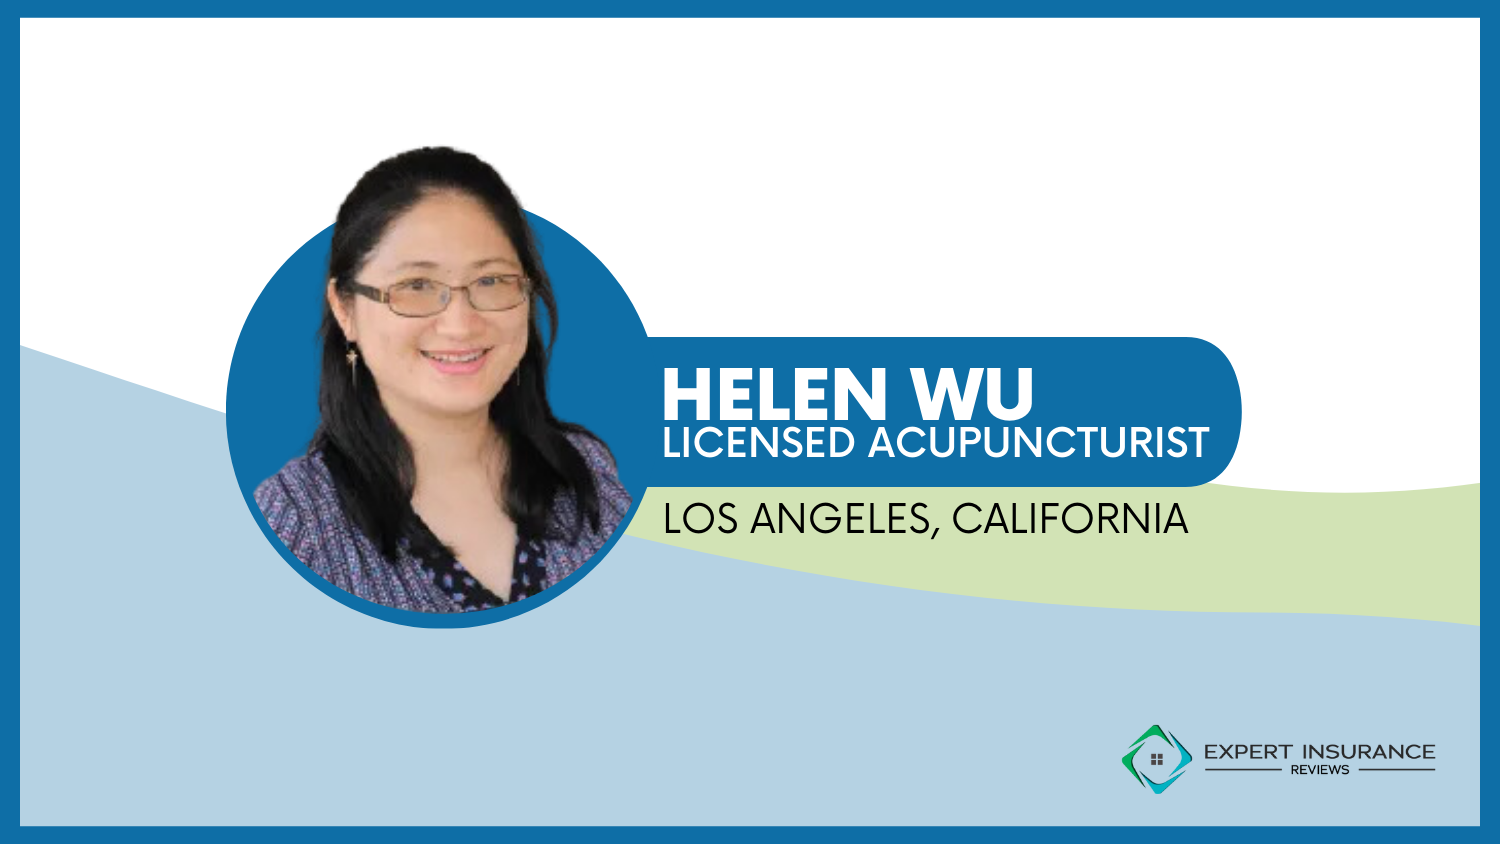 Best Acupuncturists That Accept Medicare: Helen Wu